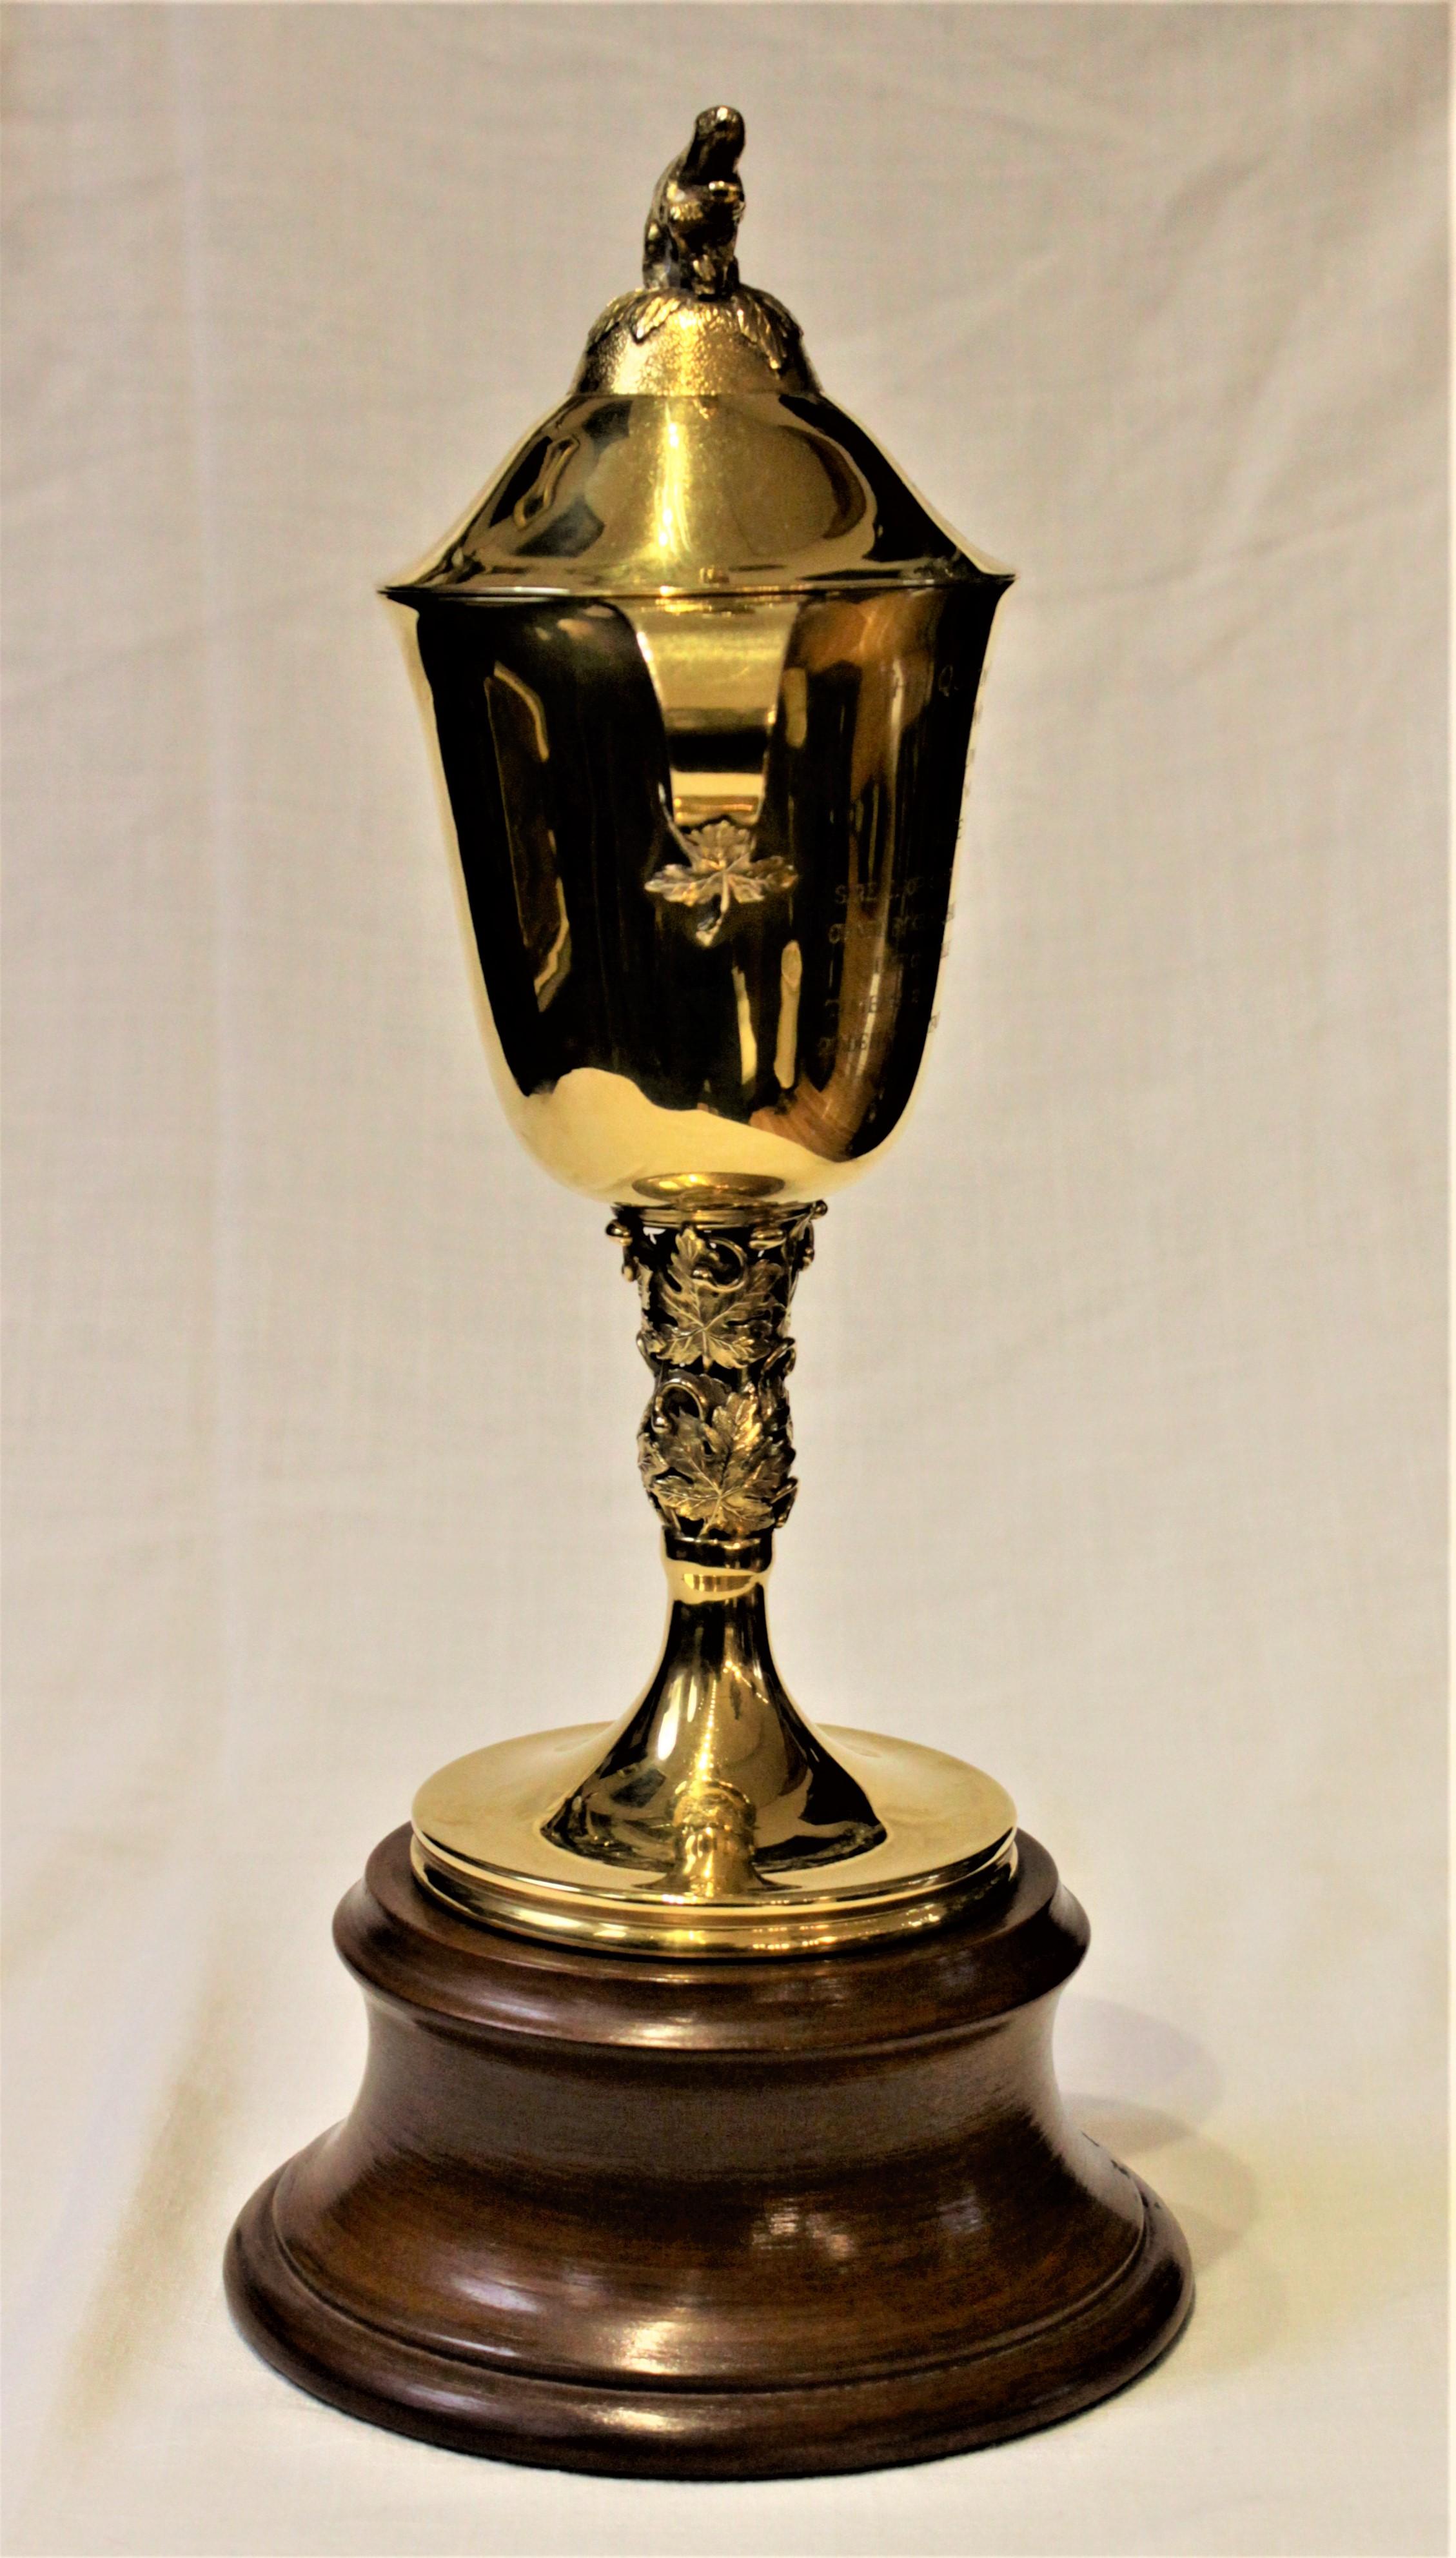 This solid 14-karat yellow gold Queen's Plate Stakes horse racing trophy was made by renowned Danish Canadian silversmith, Carl Poul Petersen for Mappins of Montreal for the 1961 running at Woodbine. The trophy incorporates iconic Canadian symbols